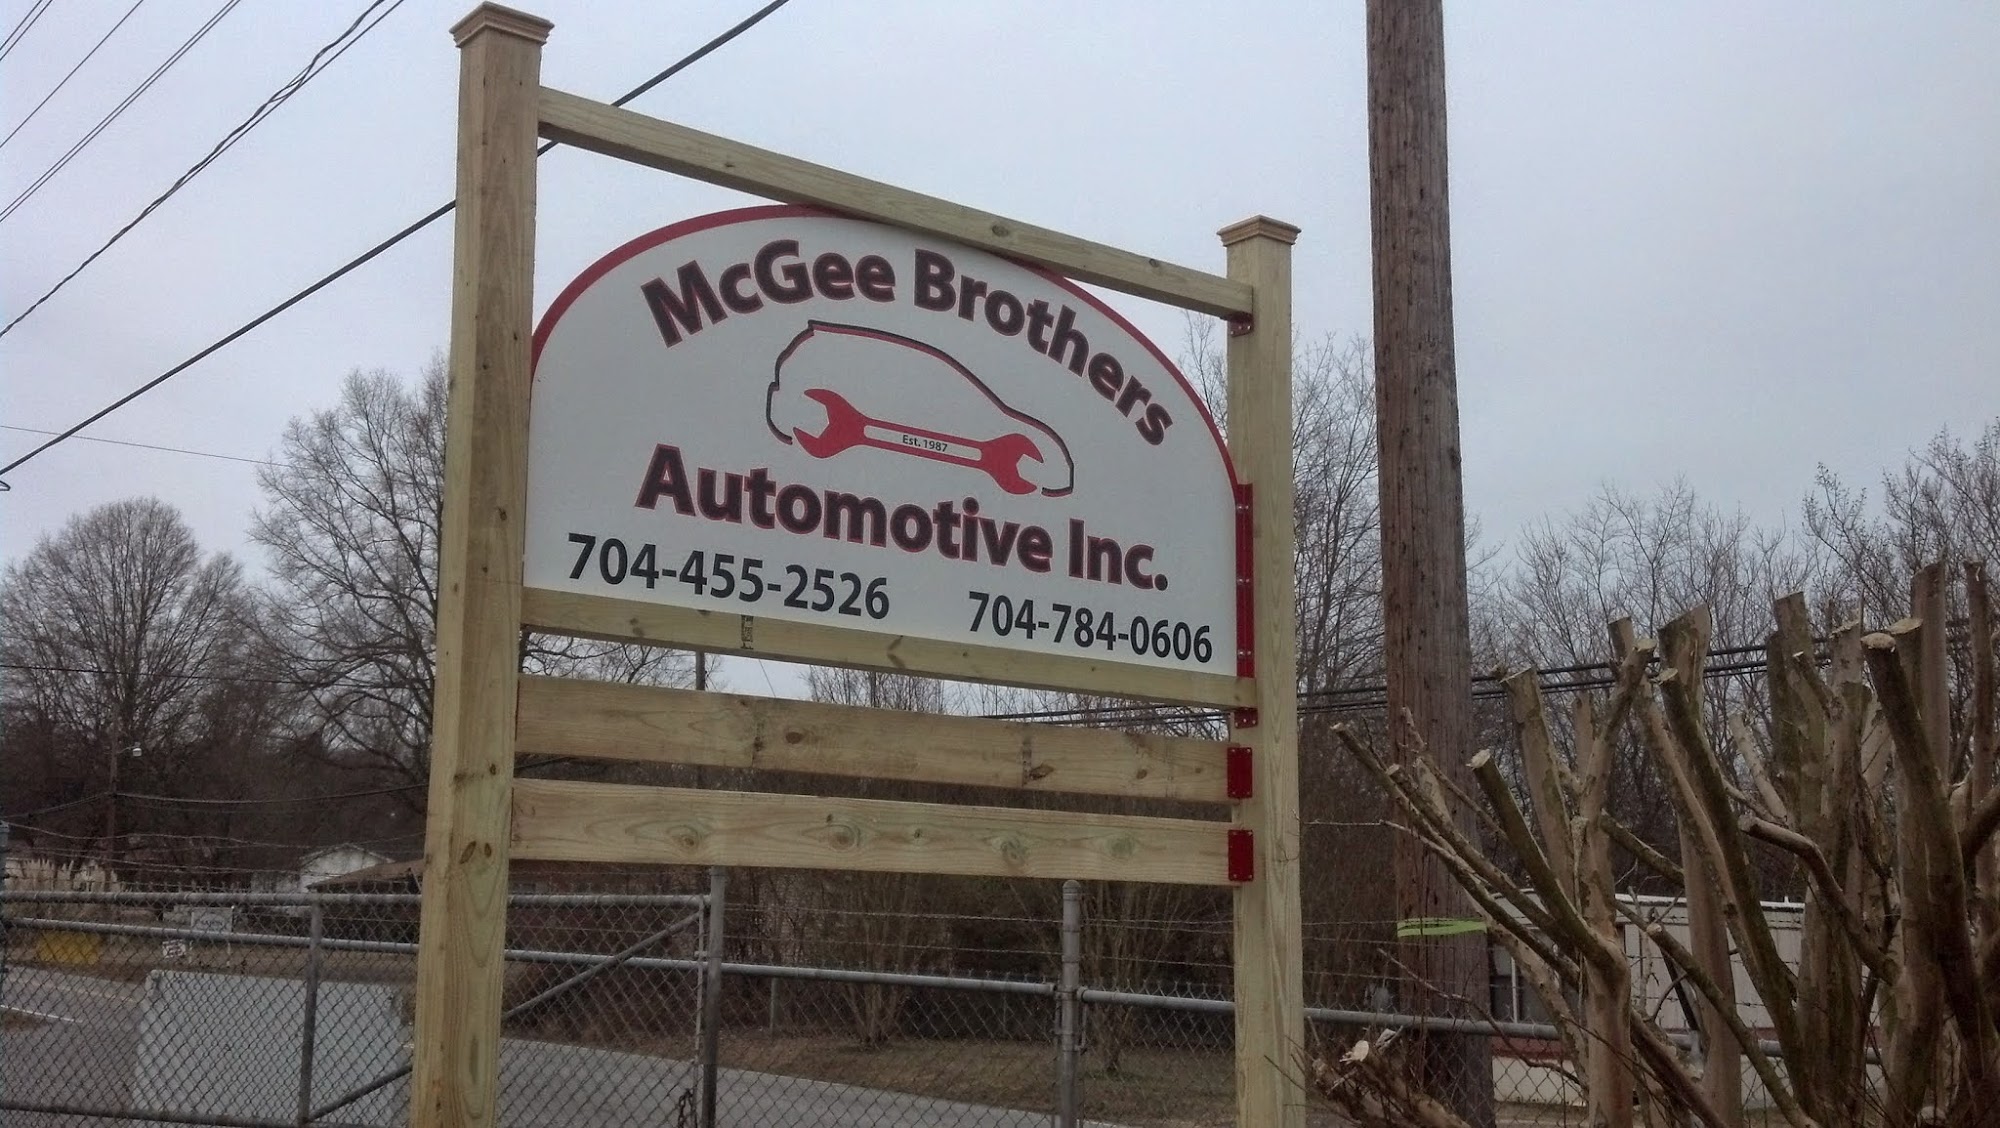 McGee Brothers Automotive, Inc.